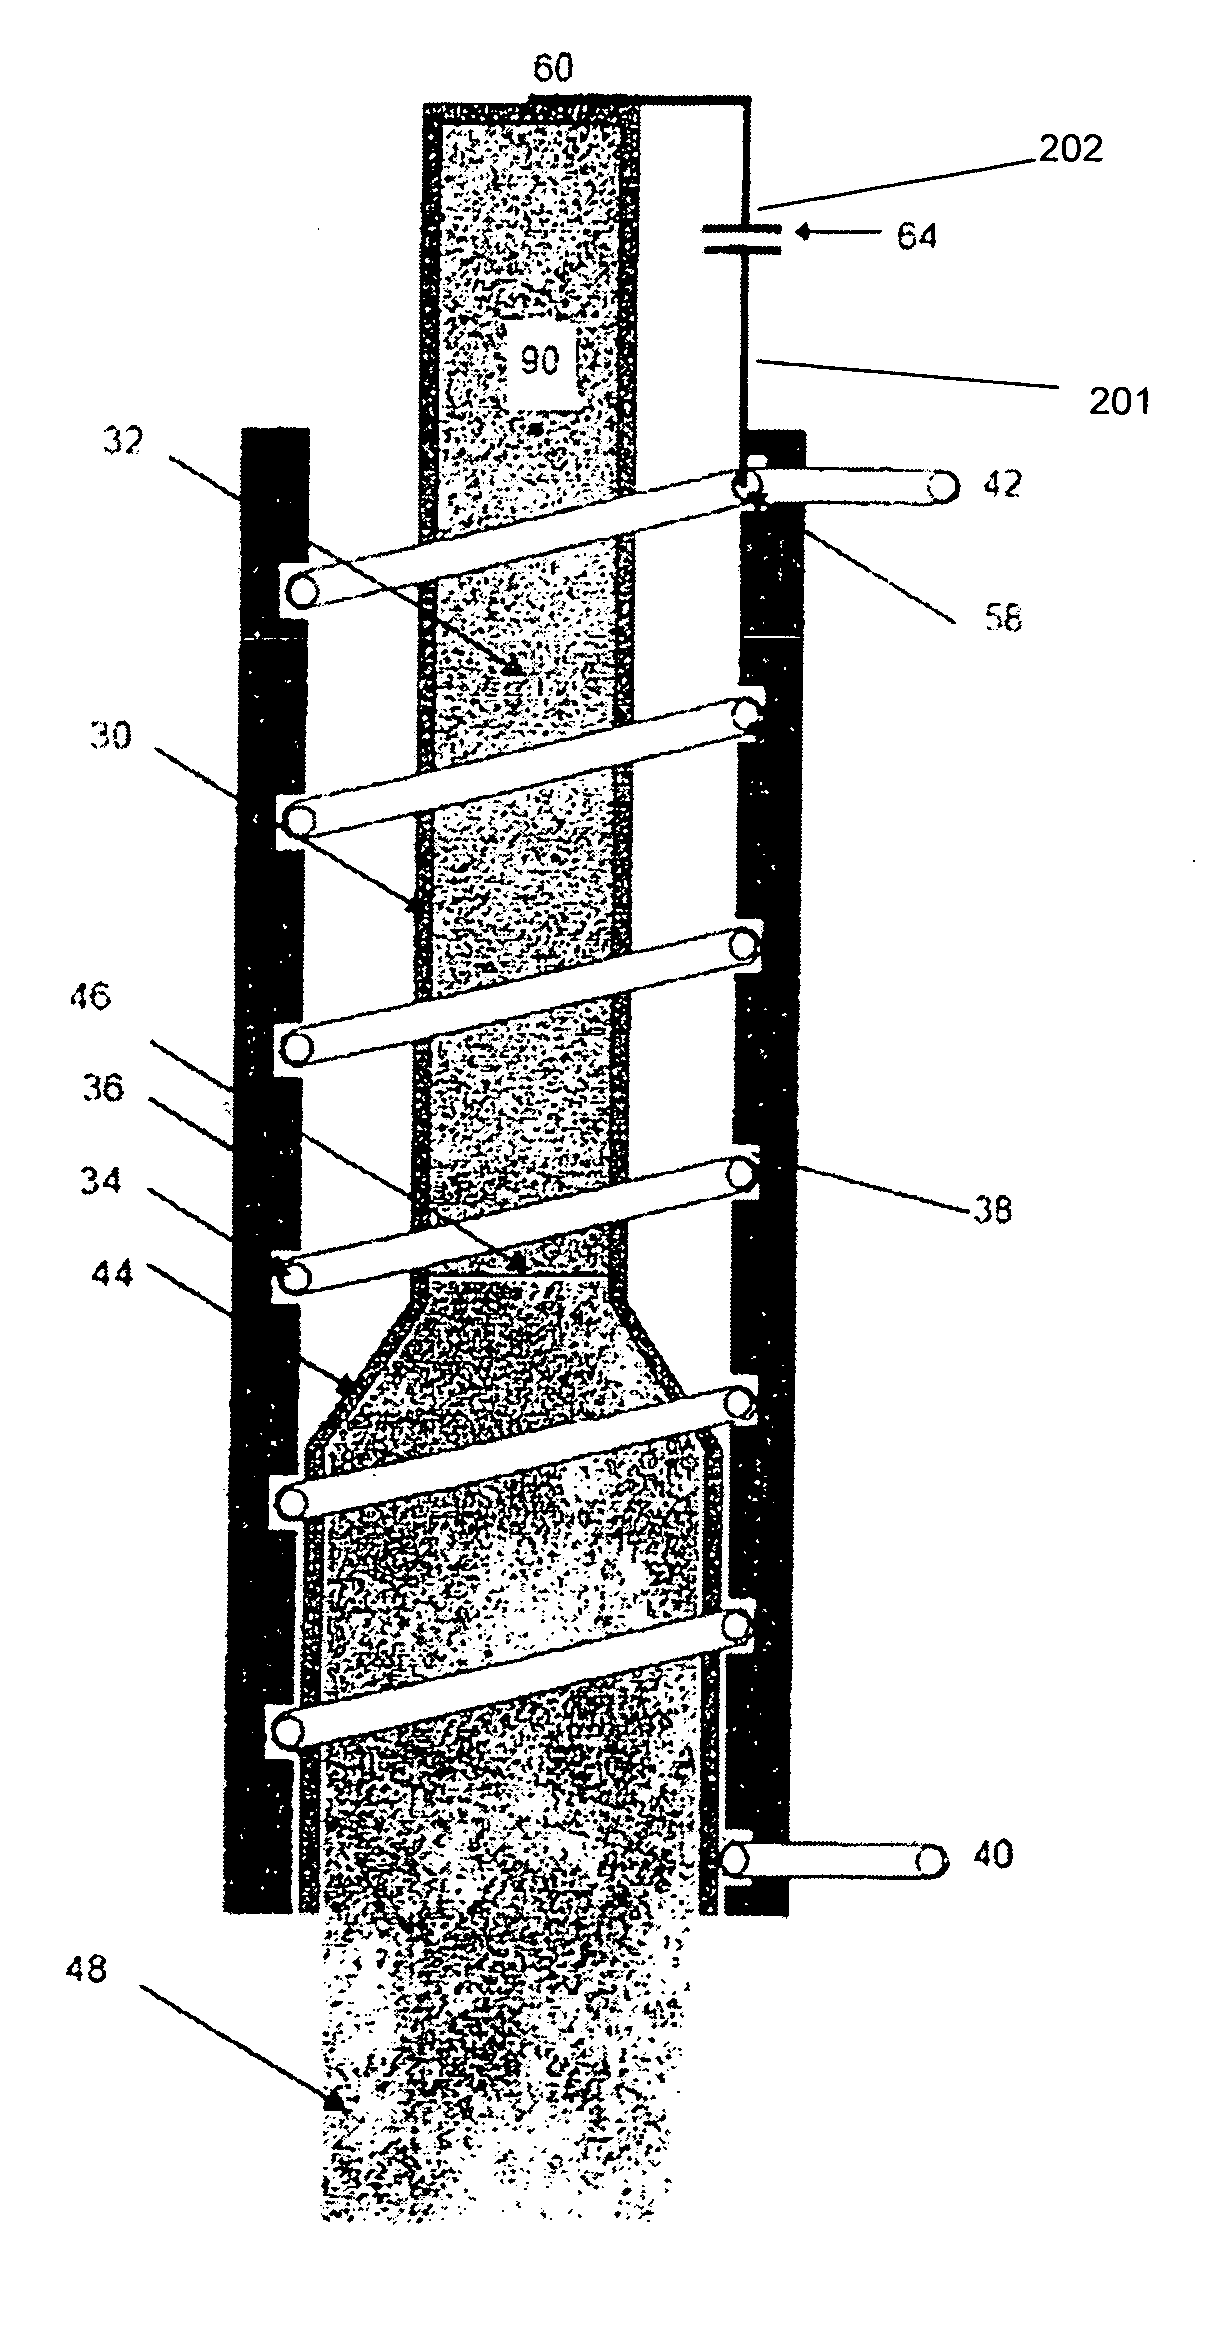 Explosively driven radio frequency pulse generating apparatus